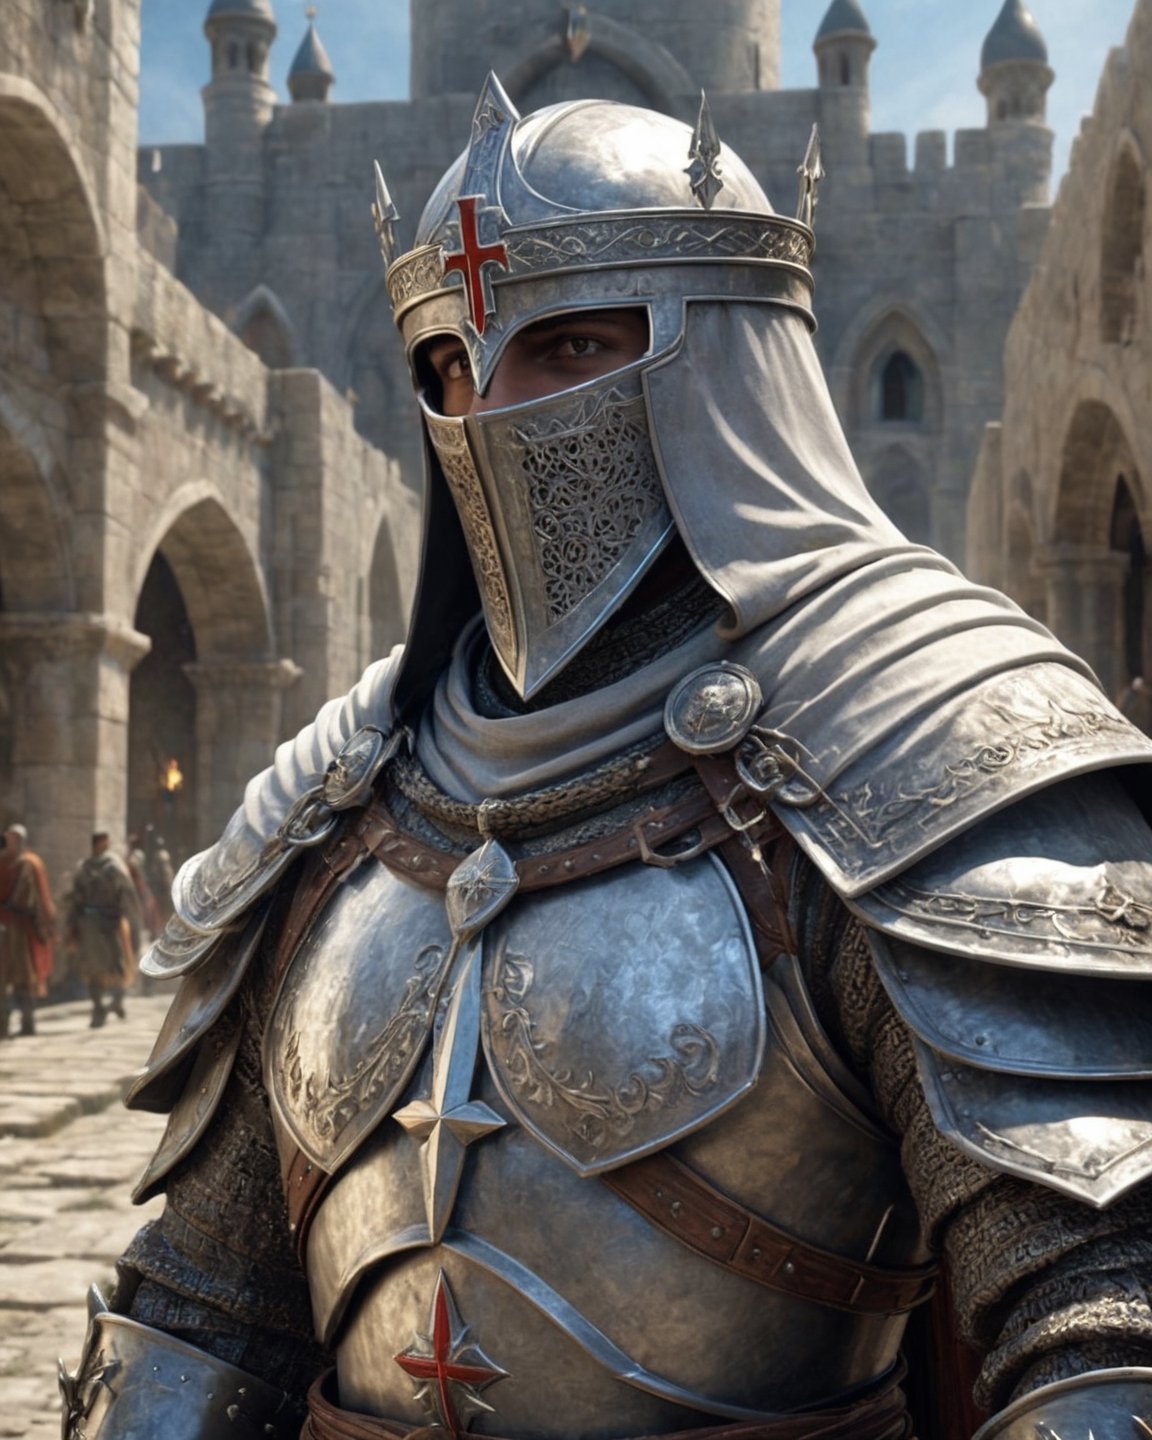 {(crusader closeup after conquering the holy city:1.5)}, {(best quality impressionist masterpiece:1.5)}, (ultra detailed face, ultra detailed eyes, ultra detailed mouth, ultra detailed body, ultra detailed hands, detailed clothes), (immersive background + detailed scenery), {symmetrical intricate details + symmetrical sharpen details}, {(aesthetic details + beautiful details + harmonic details)}